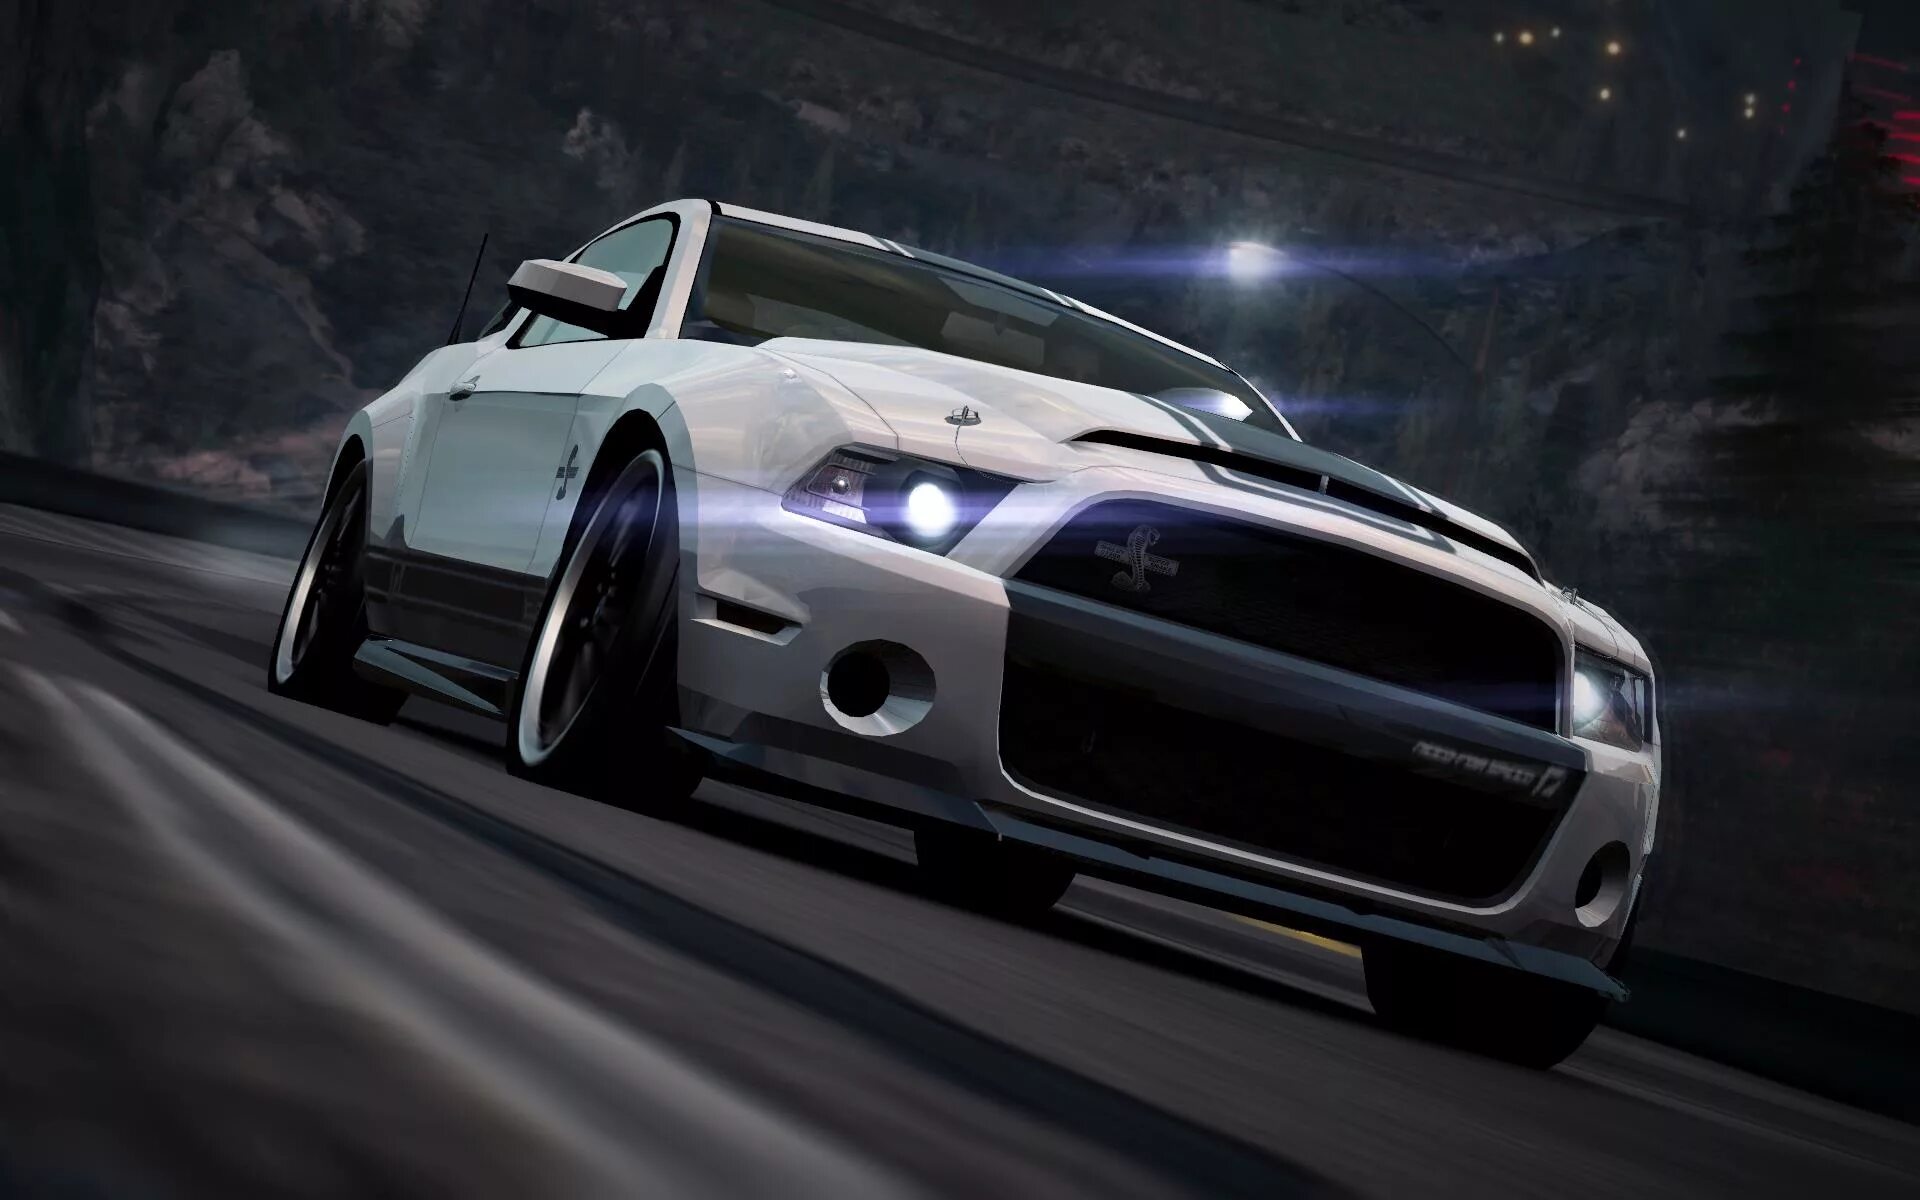 Need for speed мустанг. Ford Mustang Shelby gt500 NFS. Форд Мустанг Шелби gt 500 нфс. Ford Shelby gt500 NFS the Run. Форд Мустанг Шелби NFS the Run.